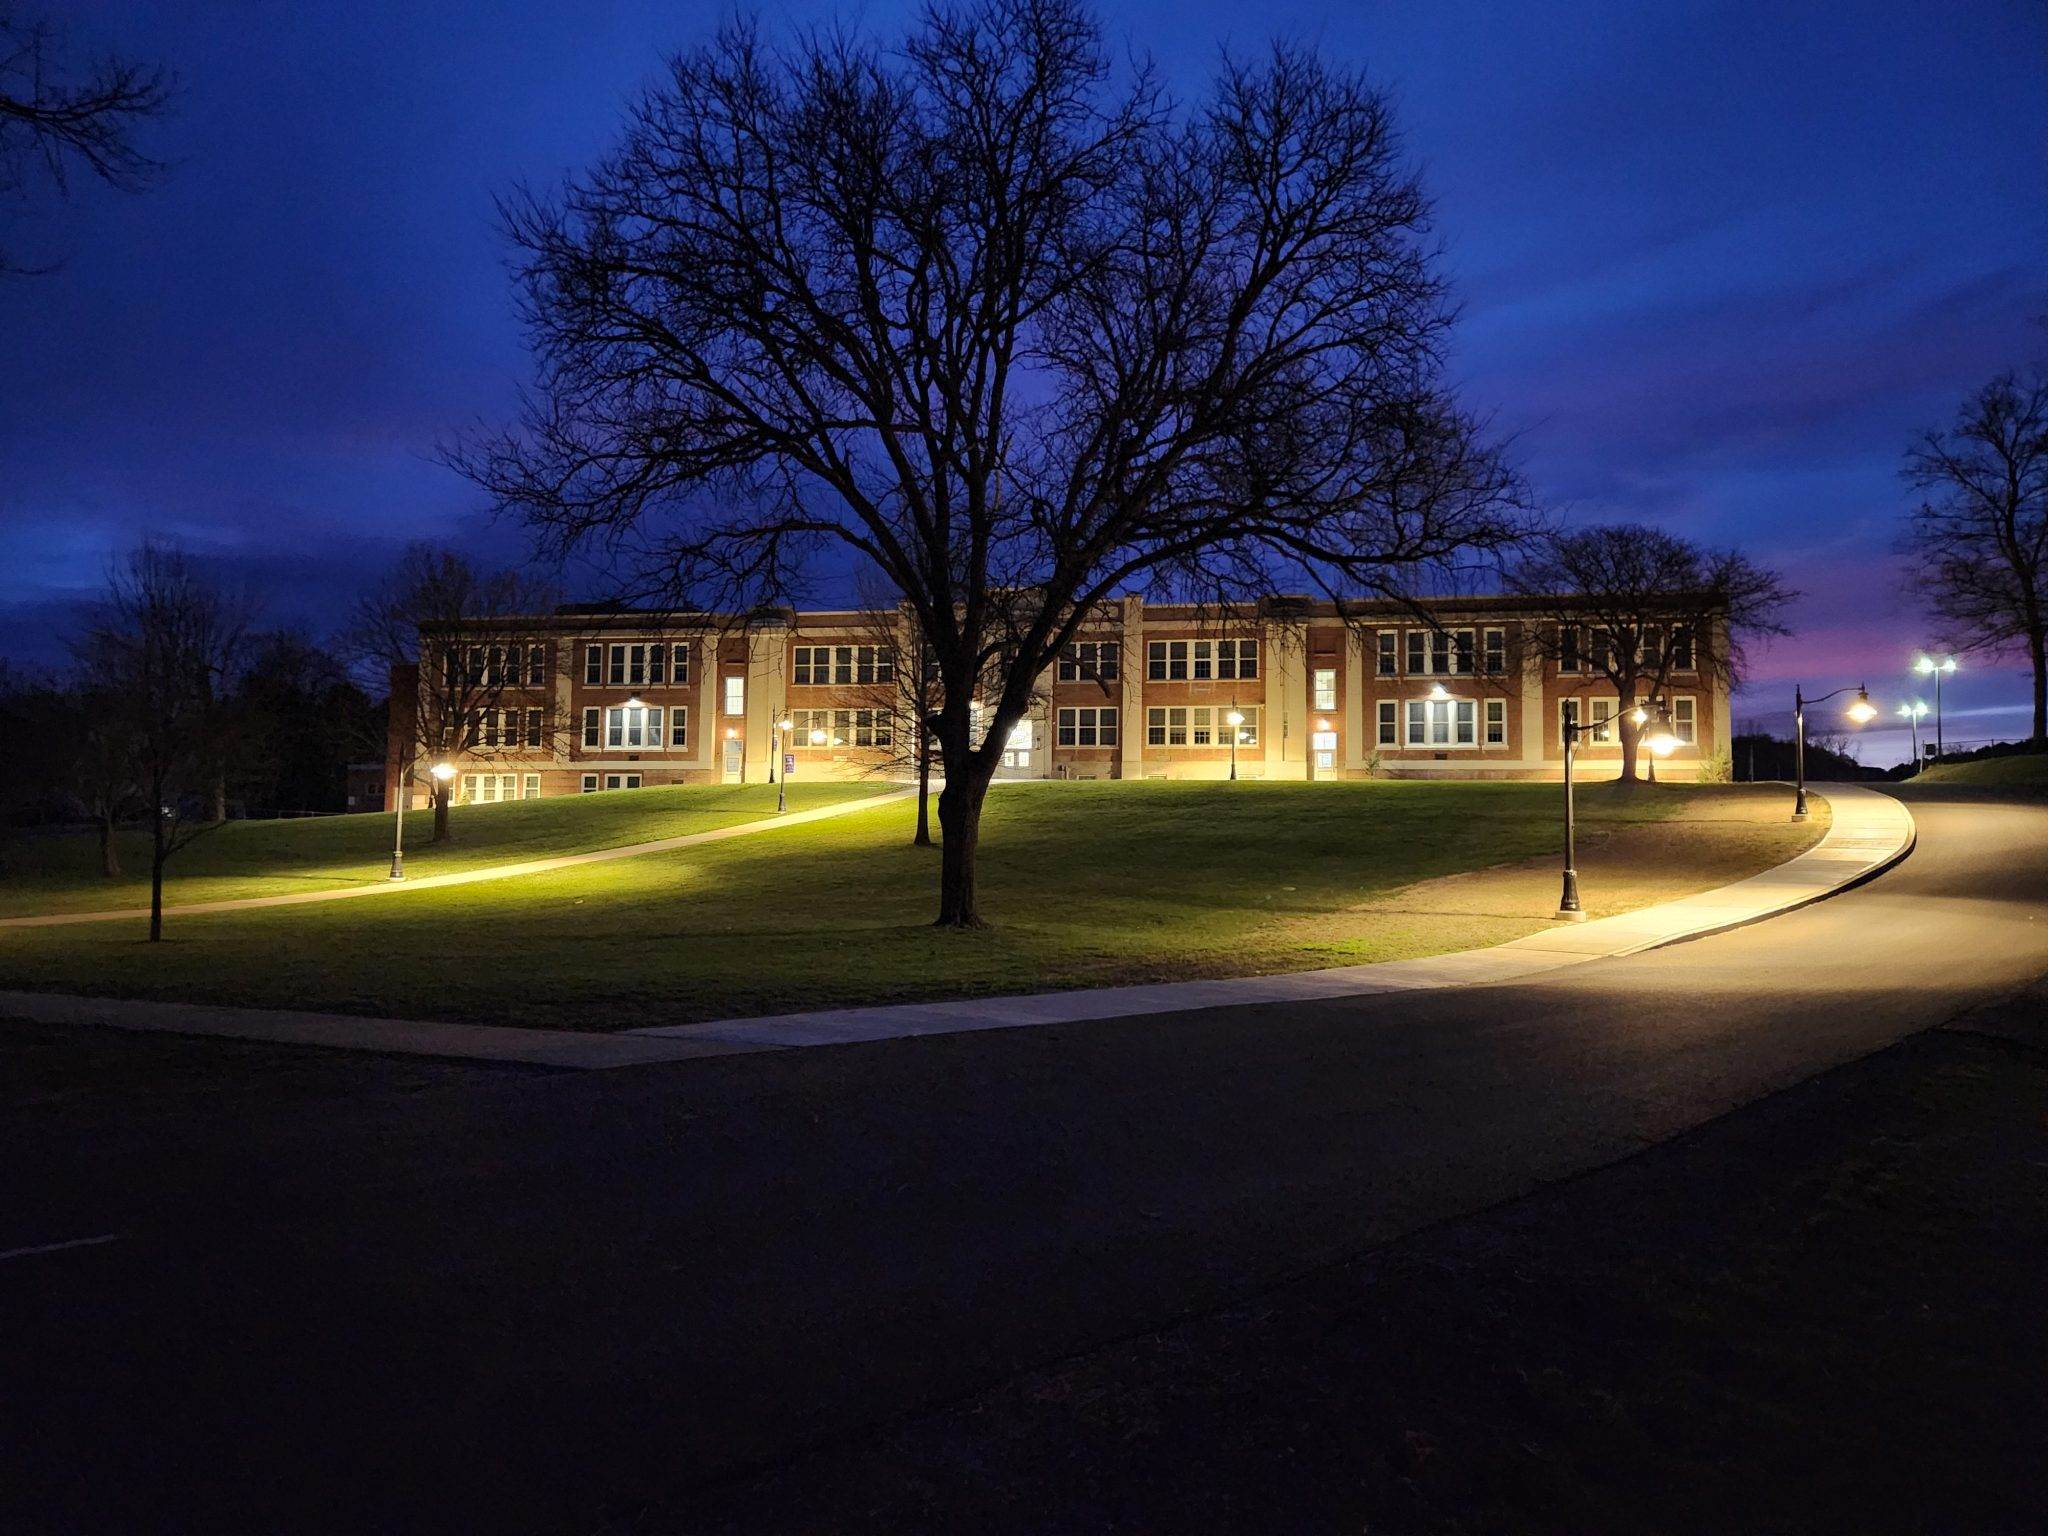 The school is seen at night